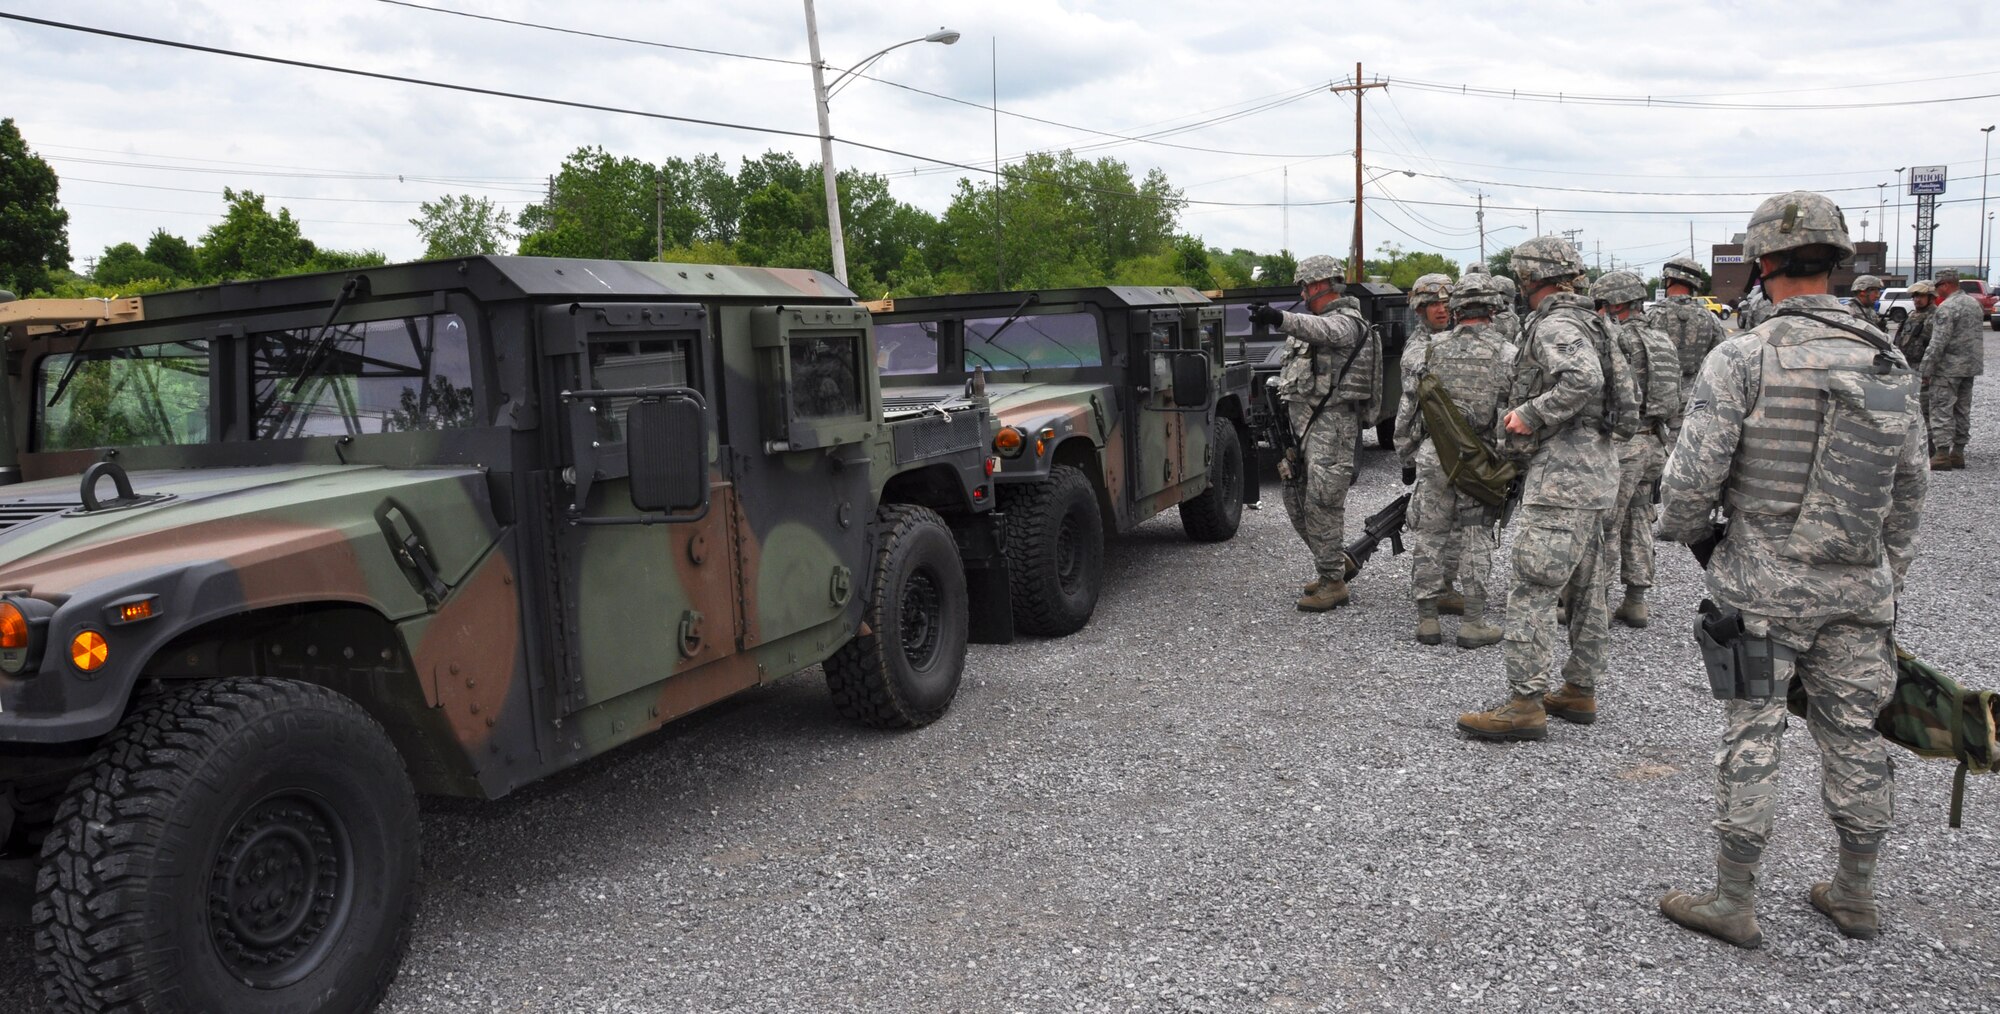 Members of the 914th Security Forces Squadron prepare to load vechicles at Buffalo Niagara International Airport on June 11, 2014. Personnel were partcipating in a simulated convoy back to Niagara Falls Air Reserve Station. (U.S. Air Force photo by Master Sgt. Kevin Nichols)